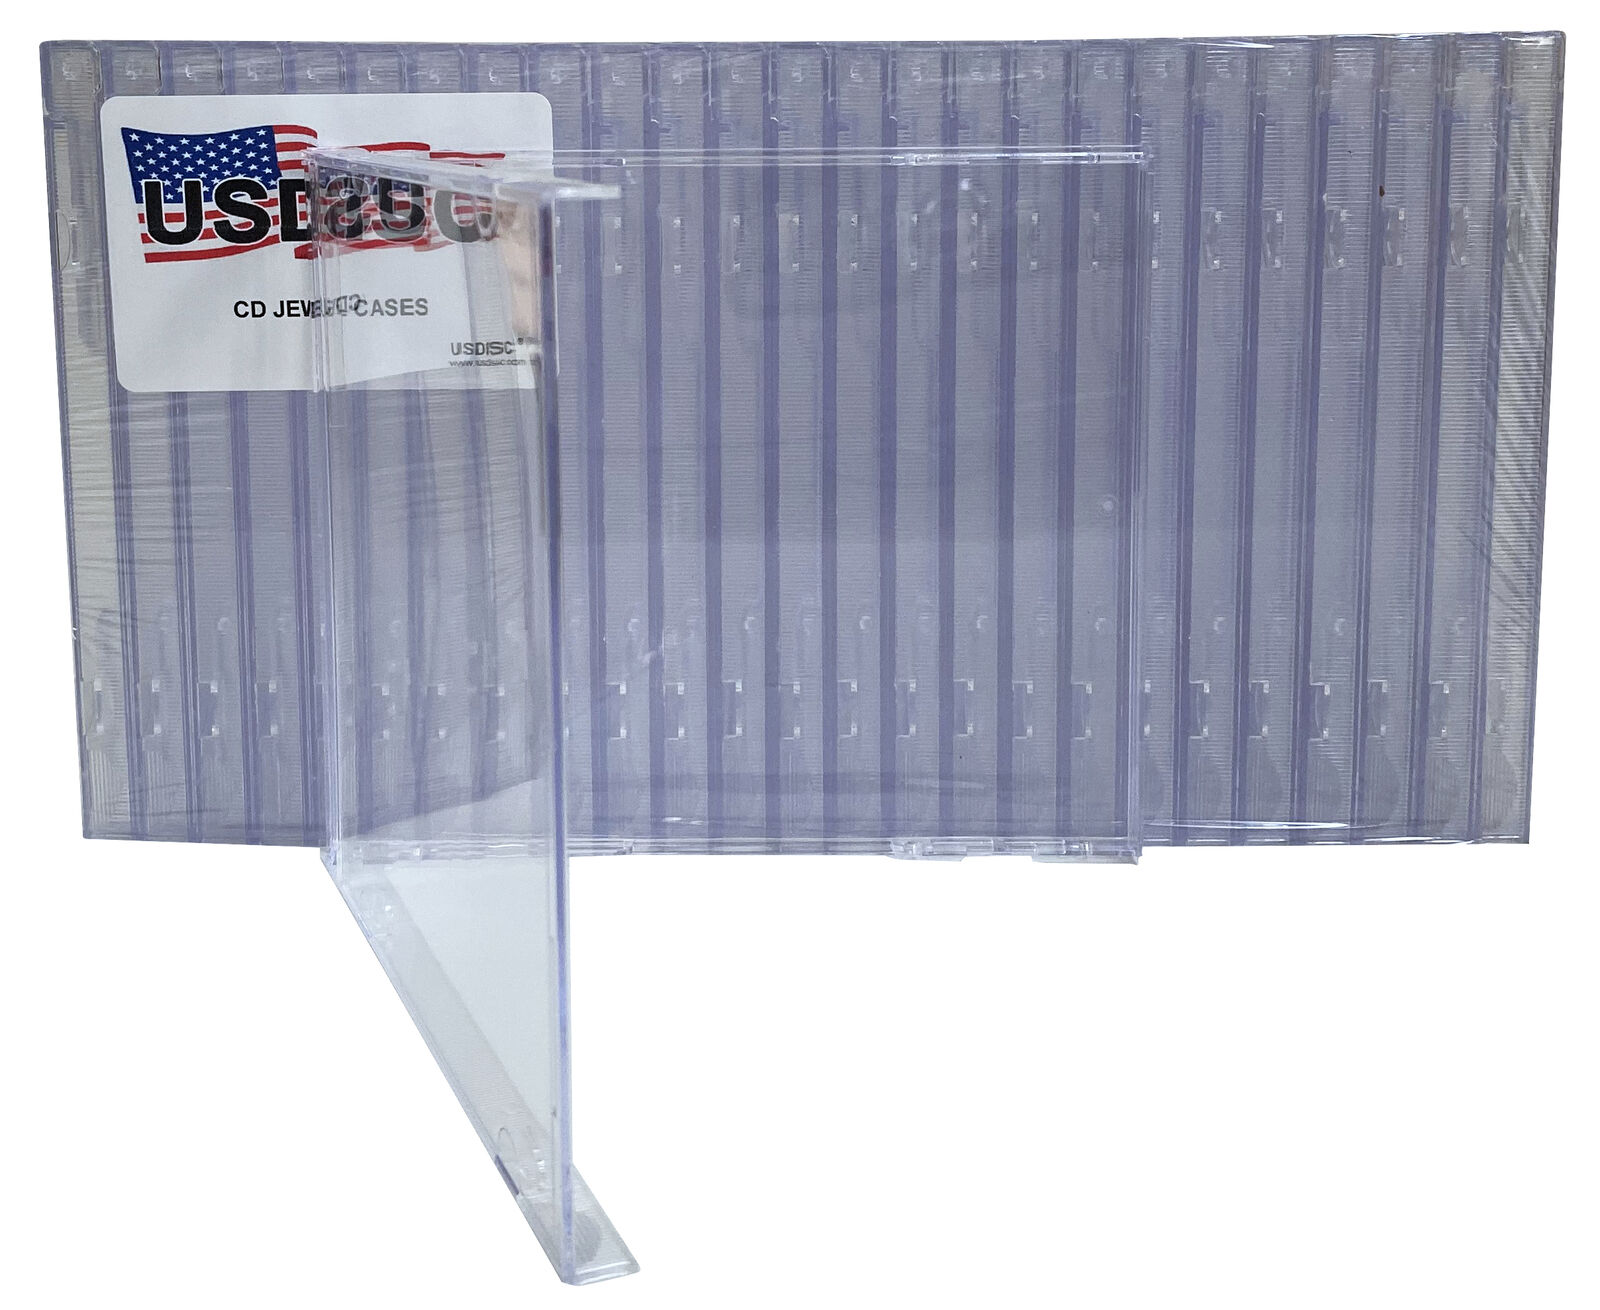 USDISC CD Jewel Cases Standard 10.4mm No Tray, Single 1 Disc (Clear) Lot